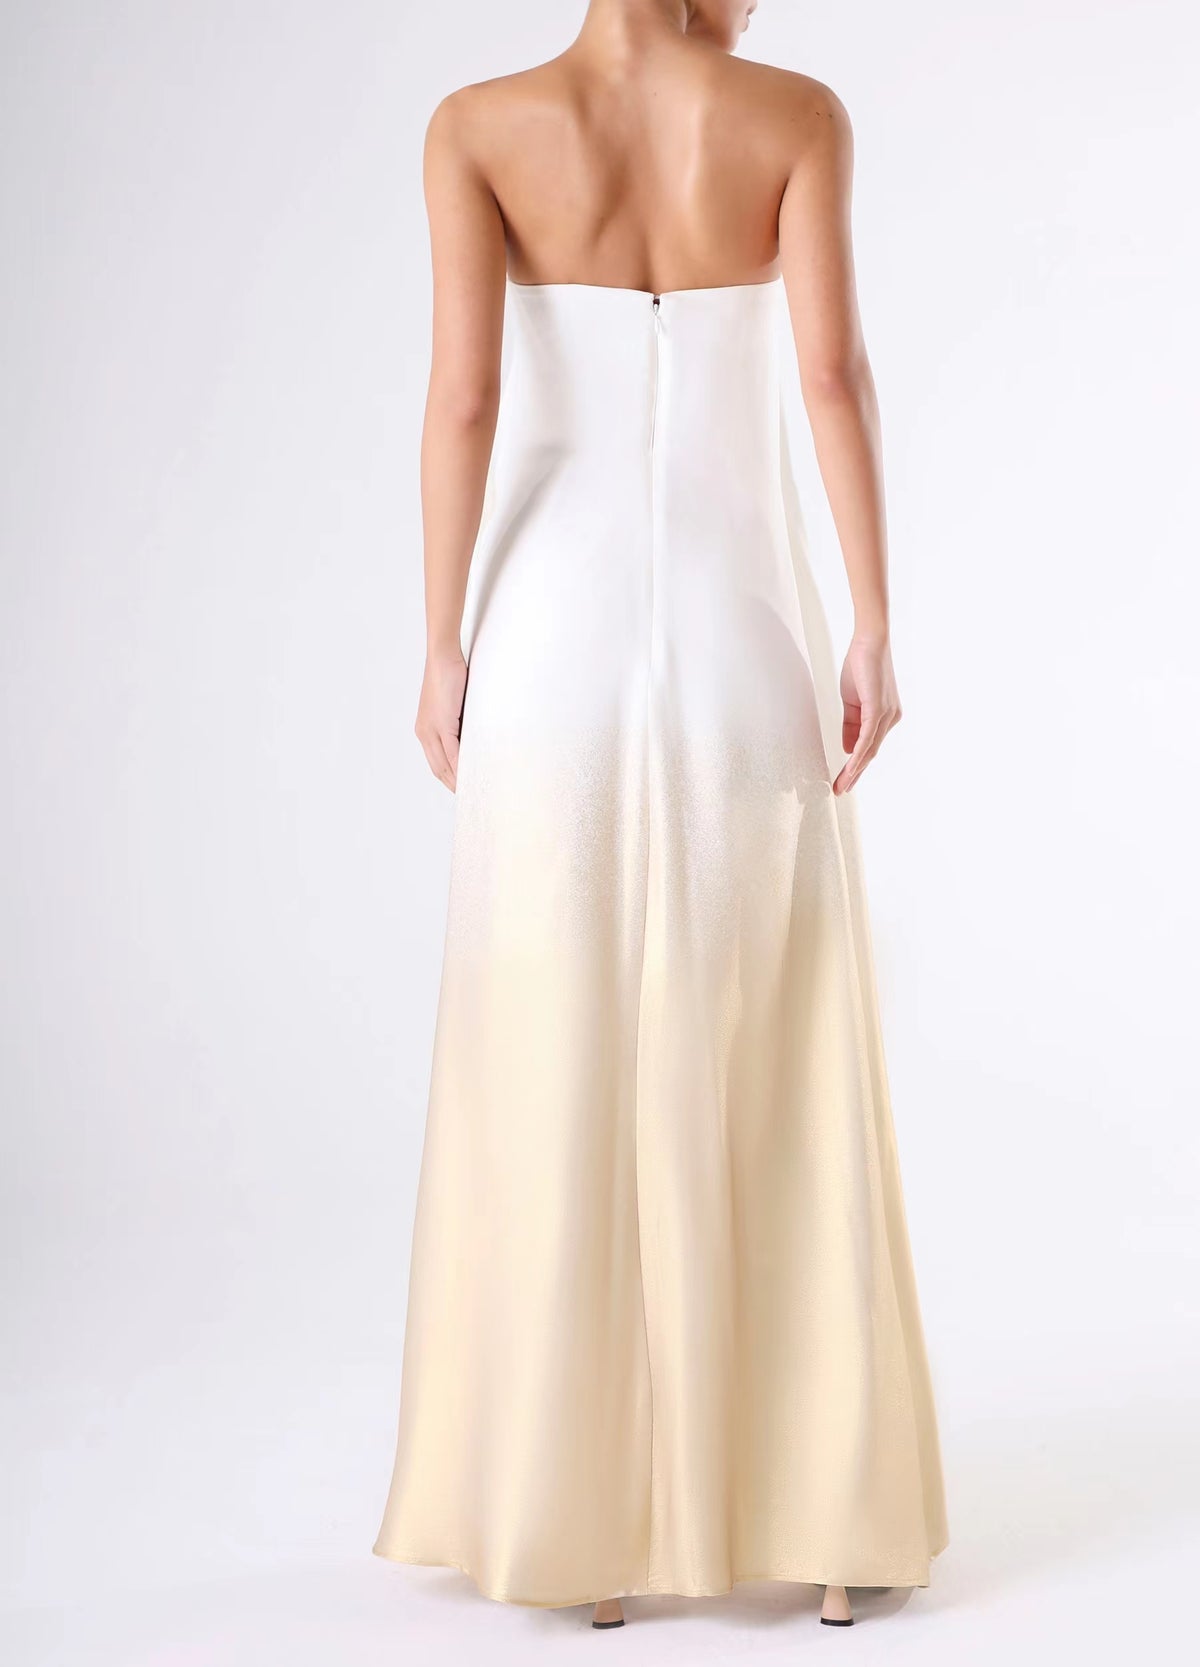 Roma dress - White to gold ombre